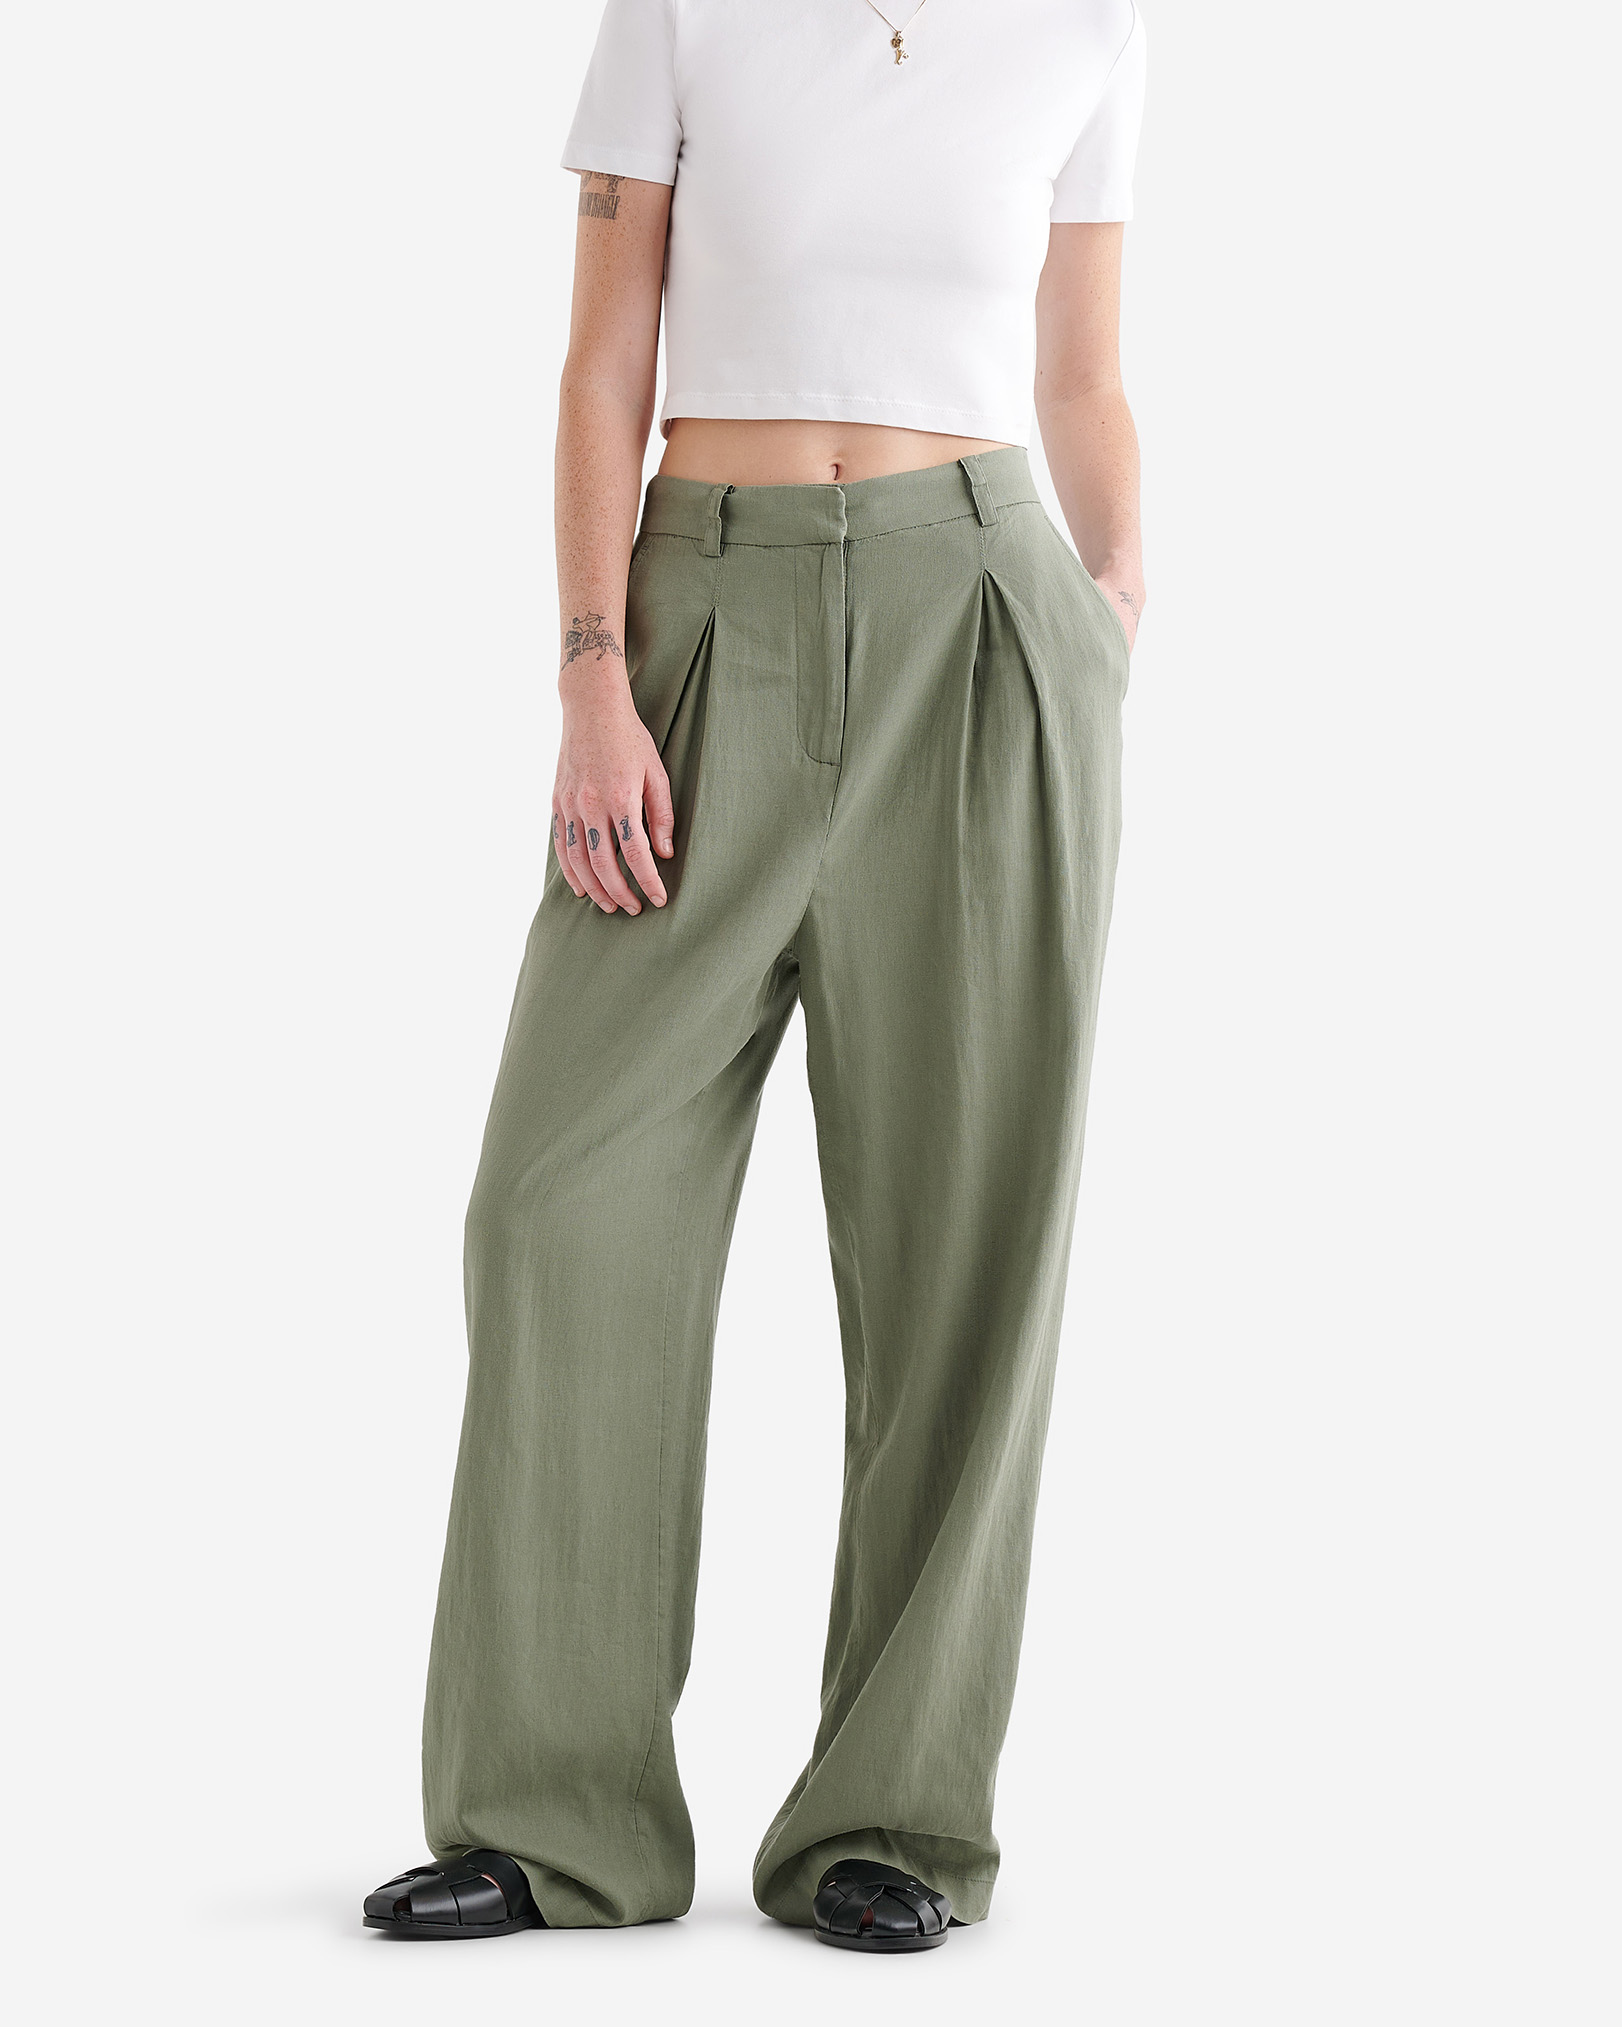 Roots Linen Trouser Pants in Agave Green